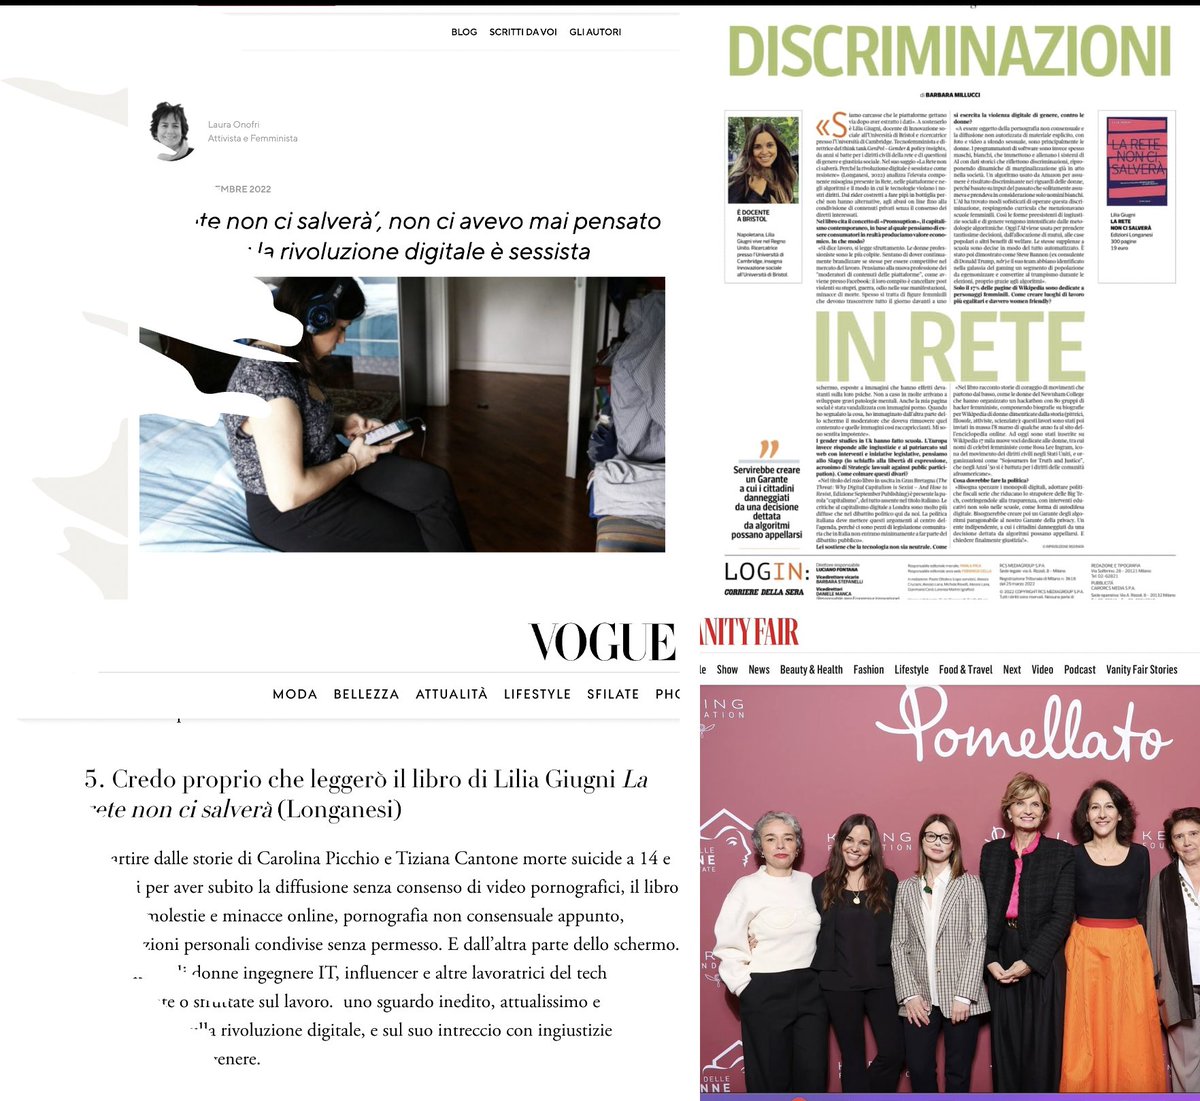 Some recent press on my #book 'The Threat', with heartfelt thanks to @Vogue_italia, @VanityFairIt, @fattoquotidiano and @Corriere for the space devoted to my work. #technology #feminism @LibriLonganesi @septemberbooks